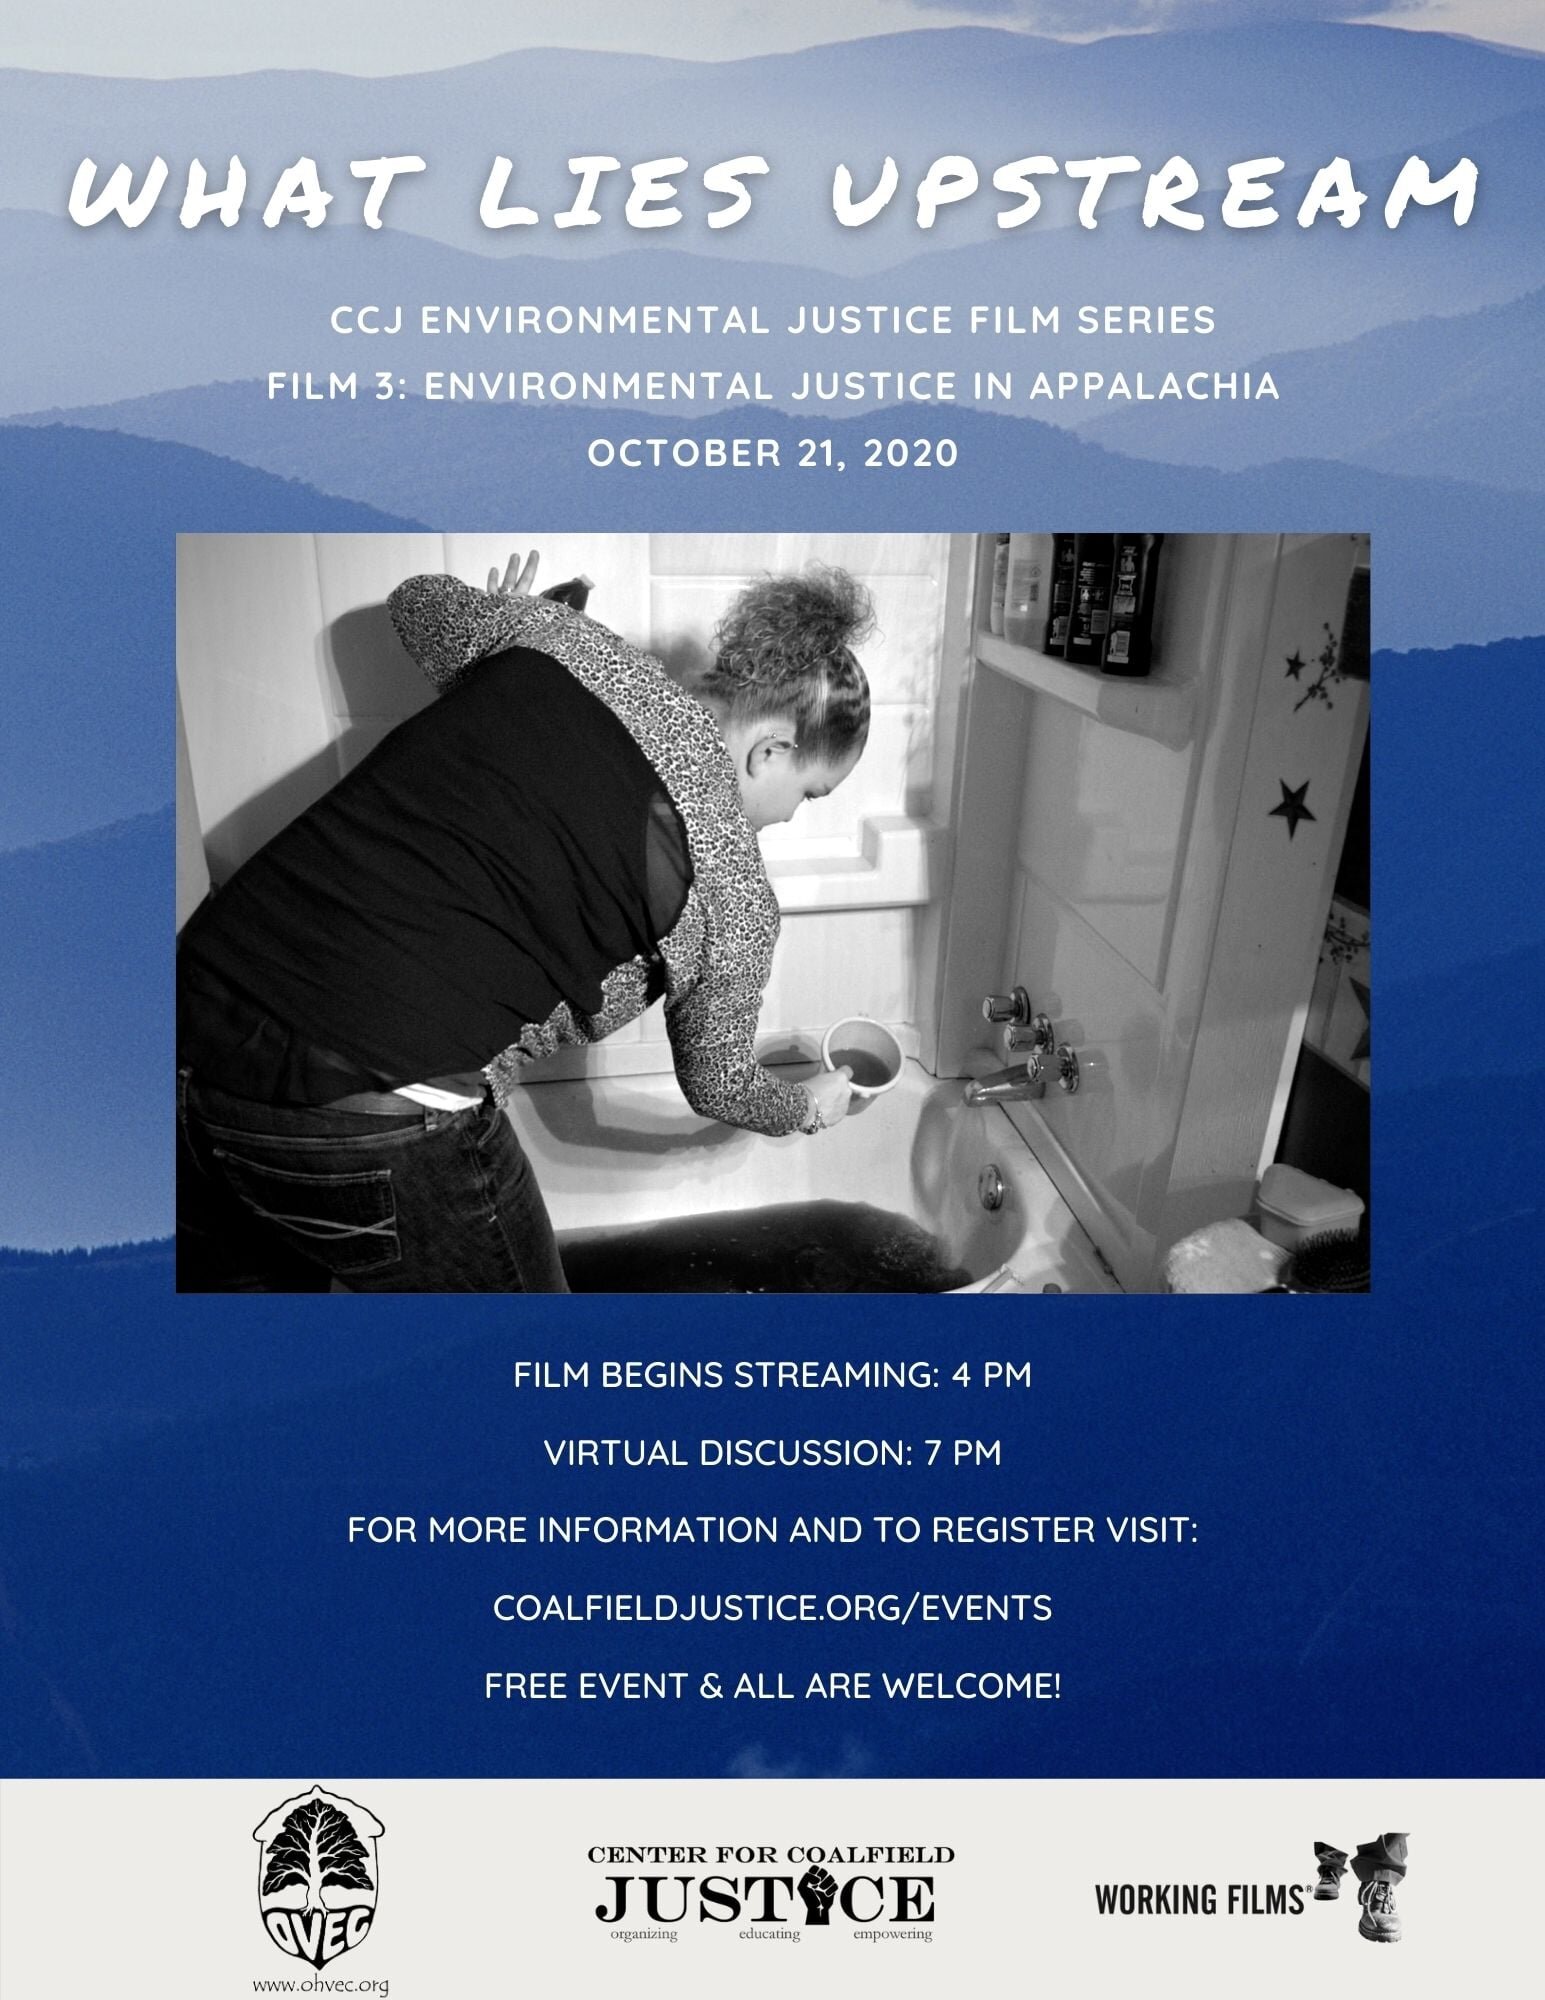 CCJ, partnered with  OVEC  (Ohio Valley Environmental Coalition), will be showing the second film in our Environmental Justice Film Series, What Lies Upstream, on Wednesday, October 21st. After the film will be a discussion with local leaders in Environmental Justice communities and a chance to connect with each other virtually! Check out our  website events page  or our  Facebook event page  for more information and to register. Once you register, you'll receive the login information.